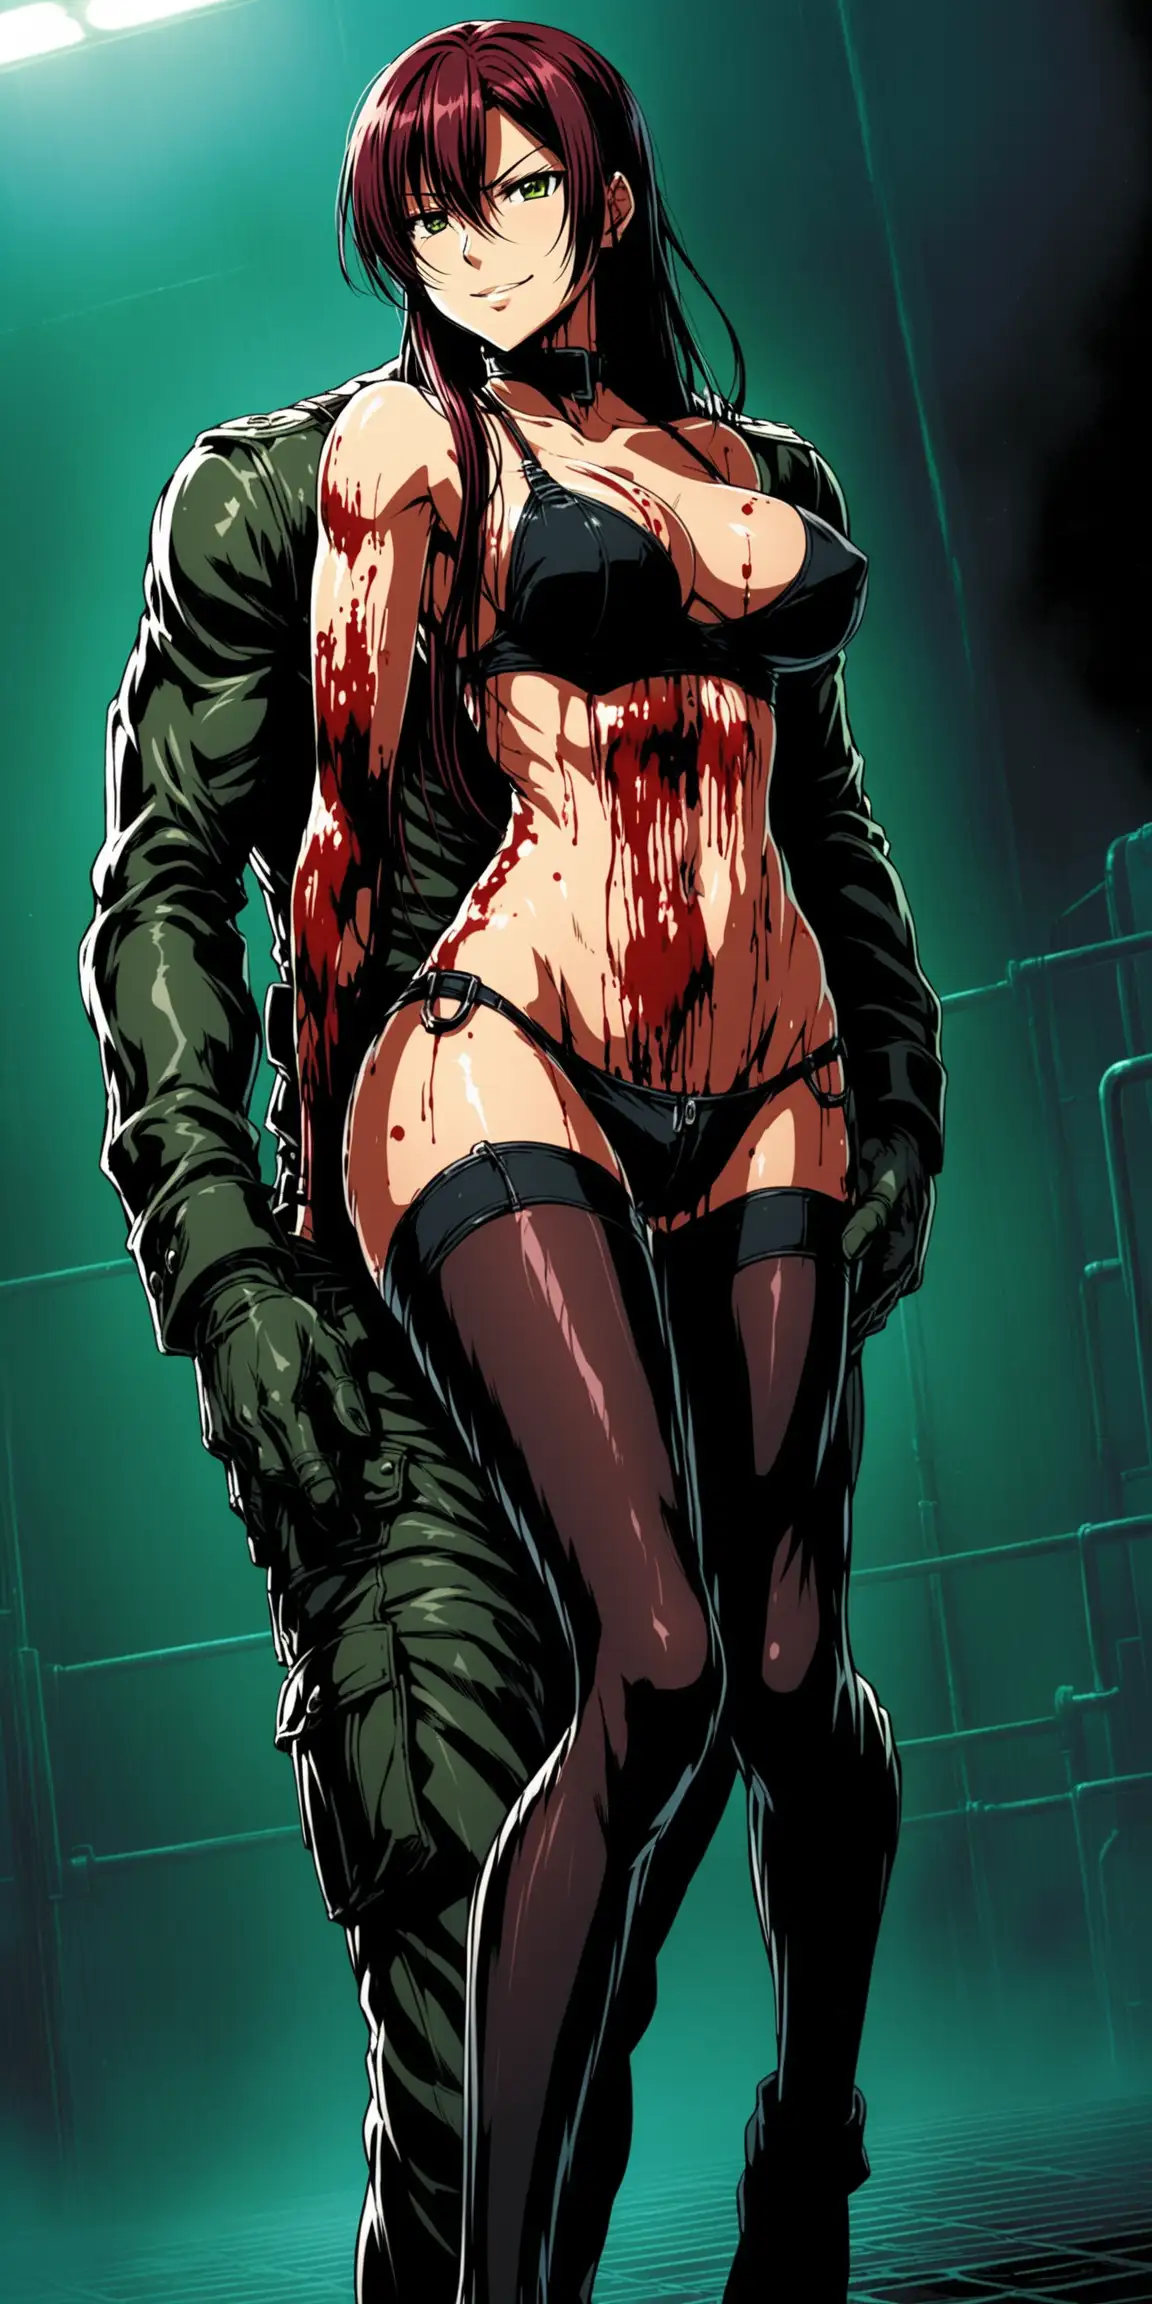 Provocative Revy from Black Lagoon Standing Over Injured Man